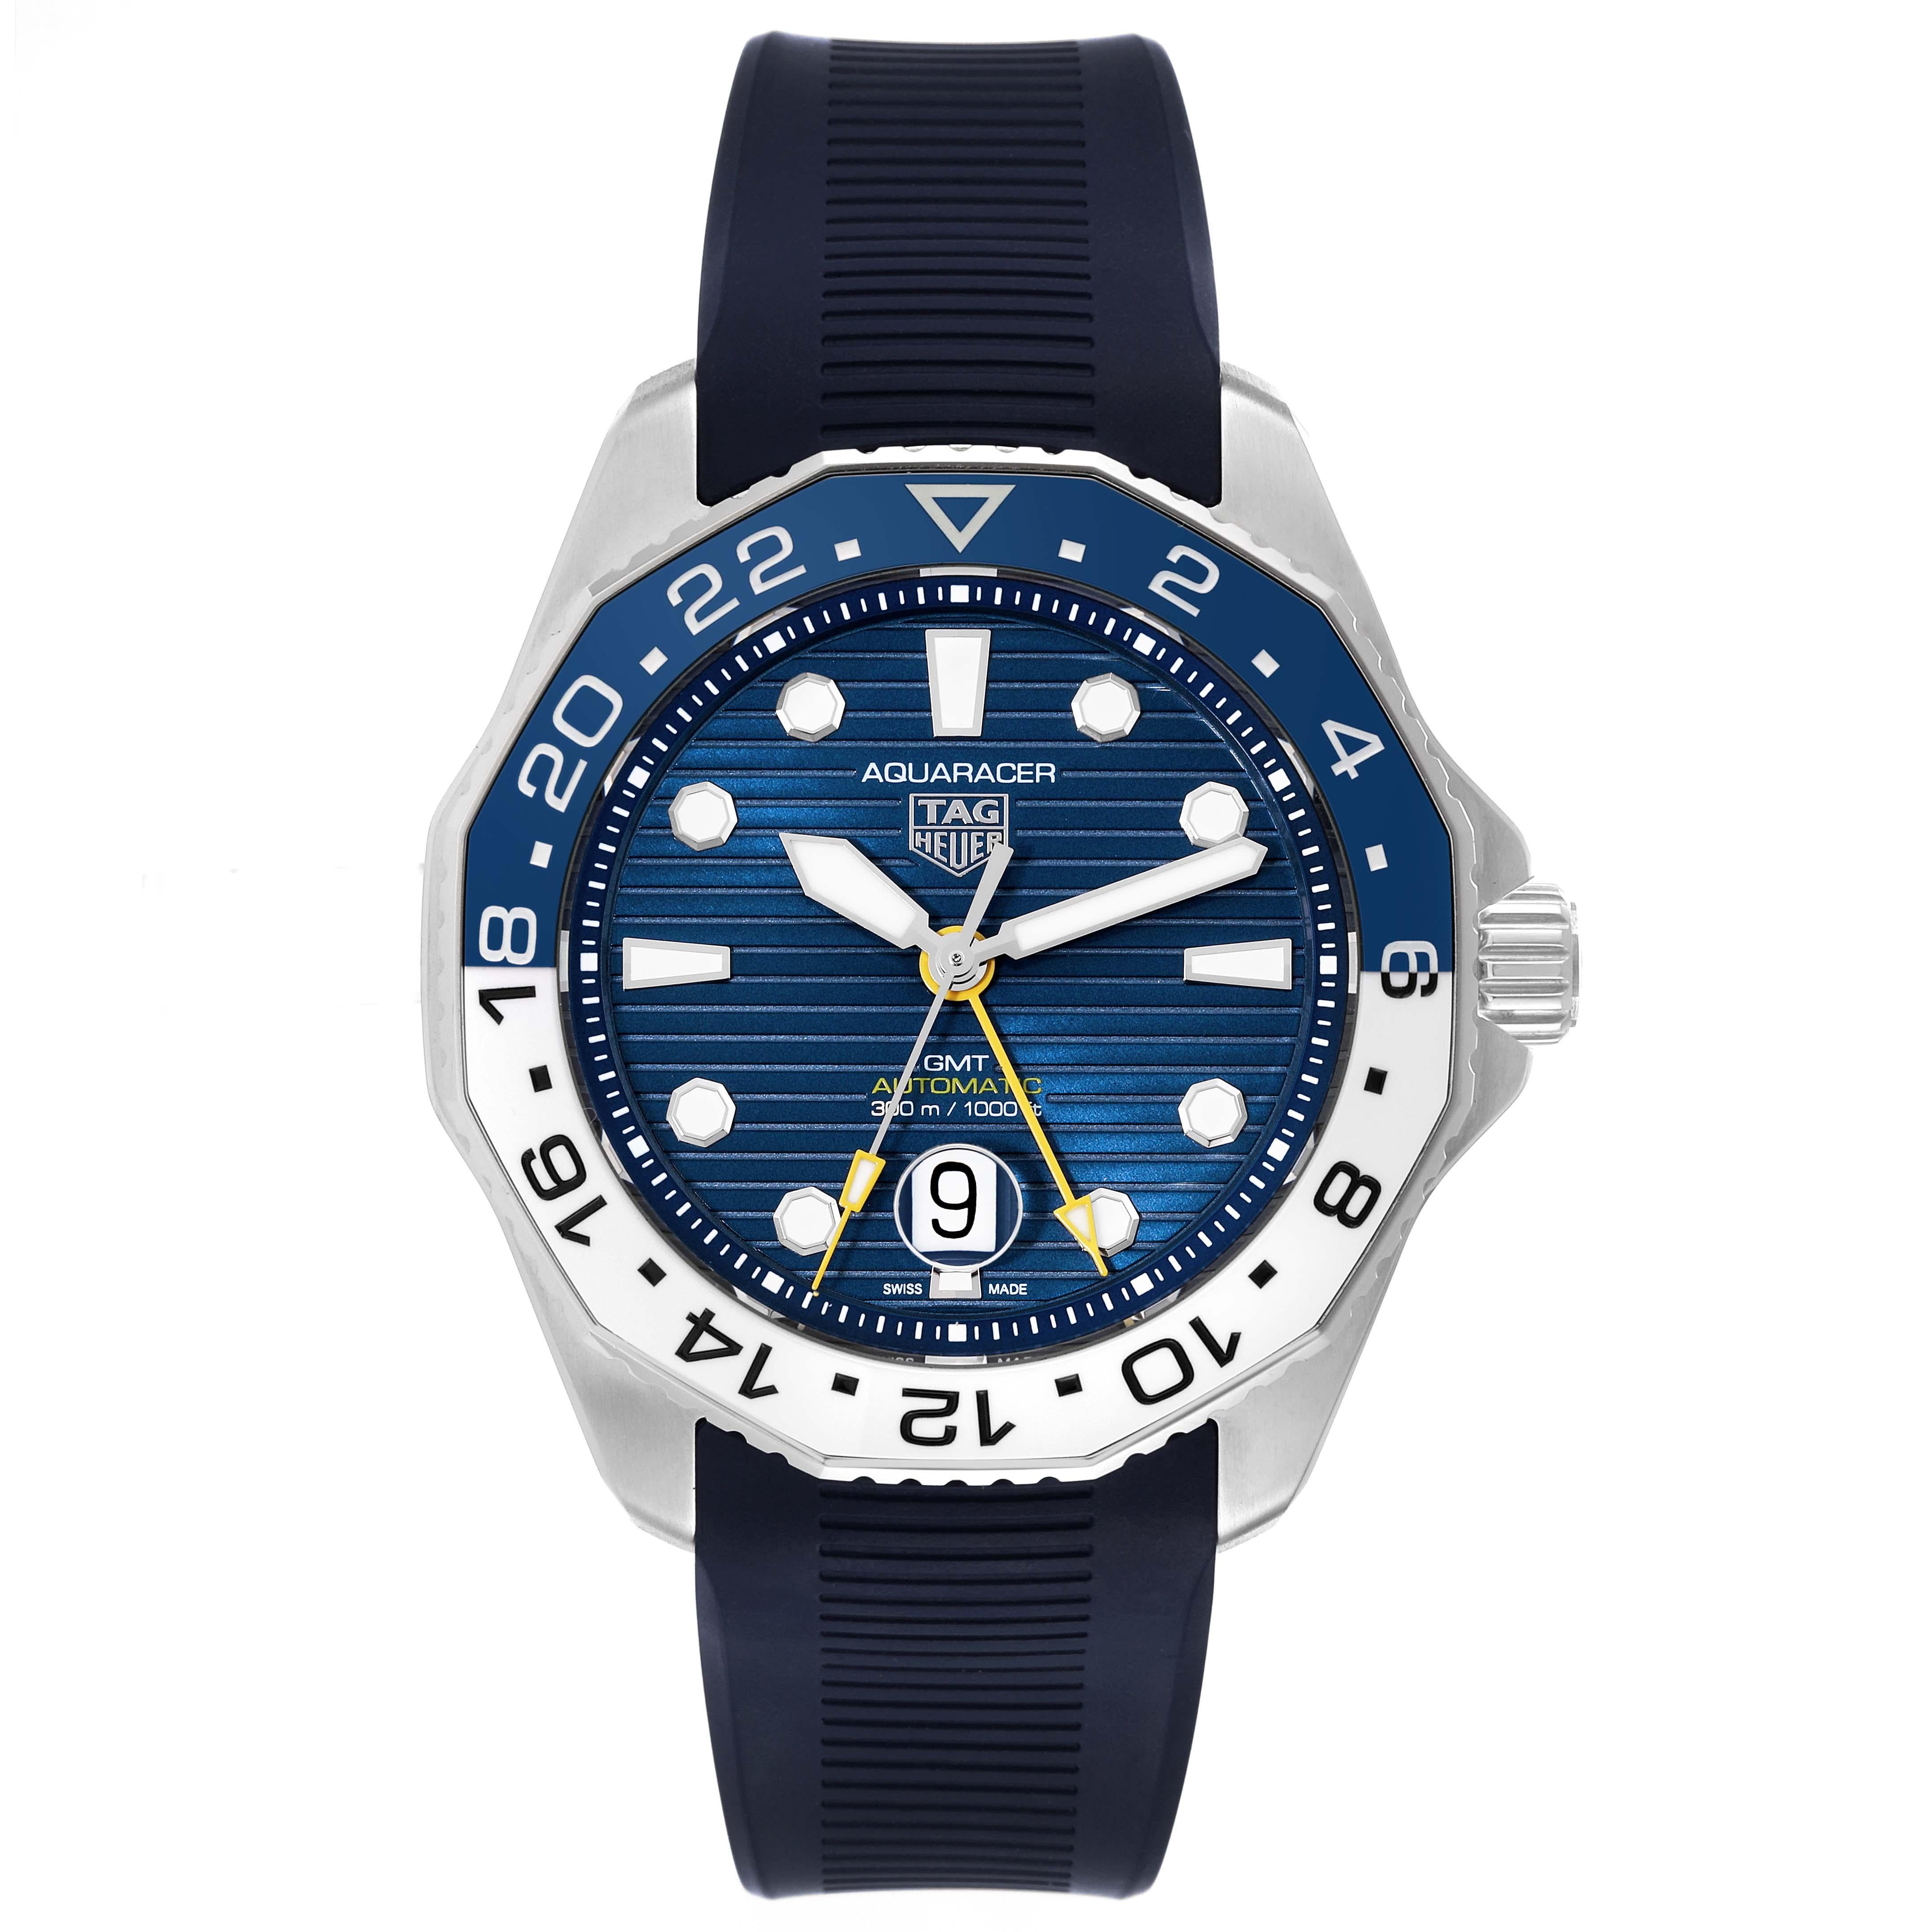 Tag Heuer Aquaracer Professional GMT Blue Dial Steel Mens Watch WBP2010 Box Card. Automatic self-winding GMT movement. Stainless steel case 43.0 mm in diameter. Blue and white bi-directional rotating ceramic bezel. Scratch resistant sapphire crystal